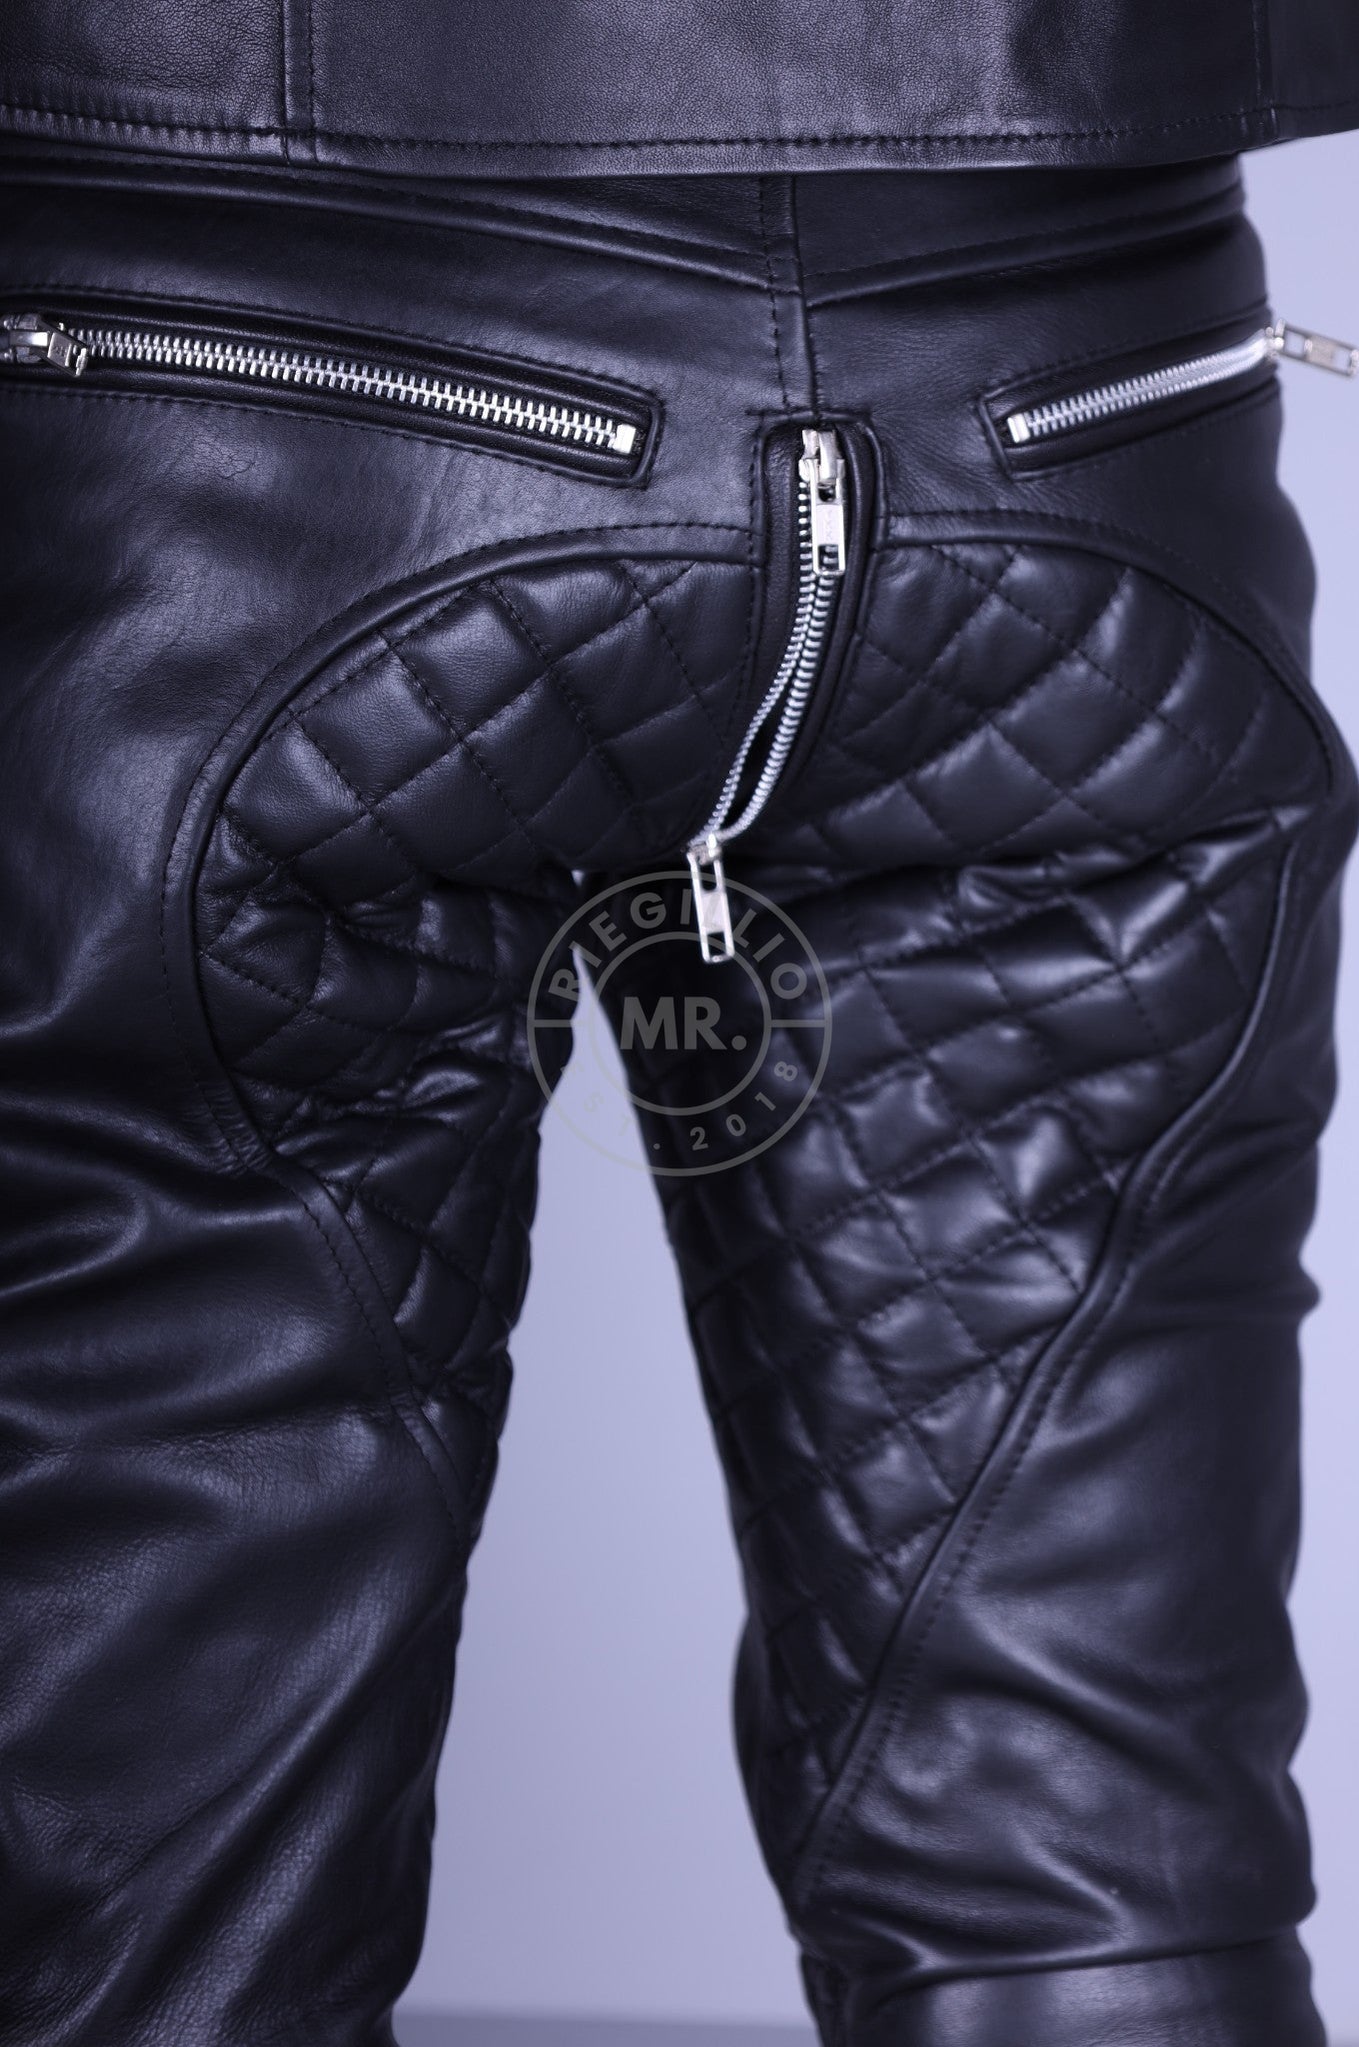 Padded Leather Pants - Black Piping by MR. Riegillo